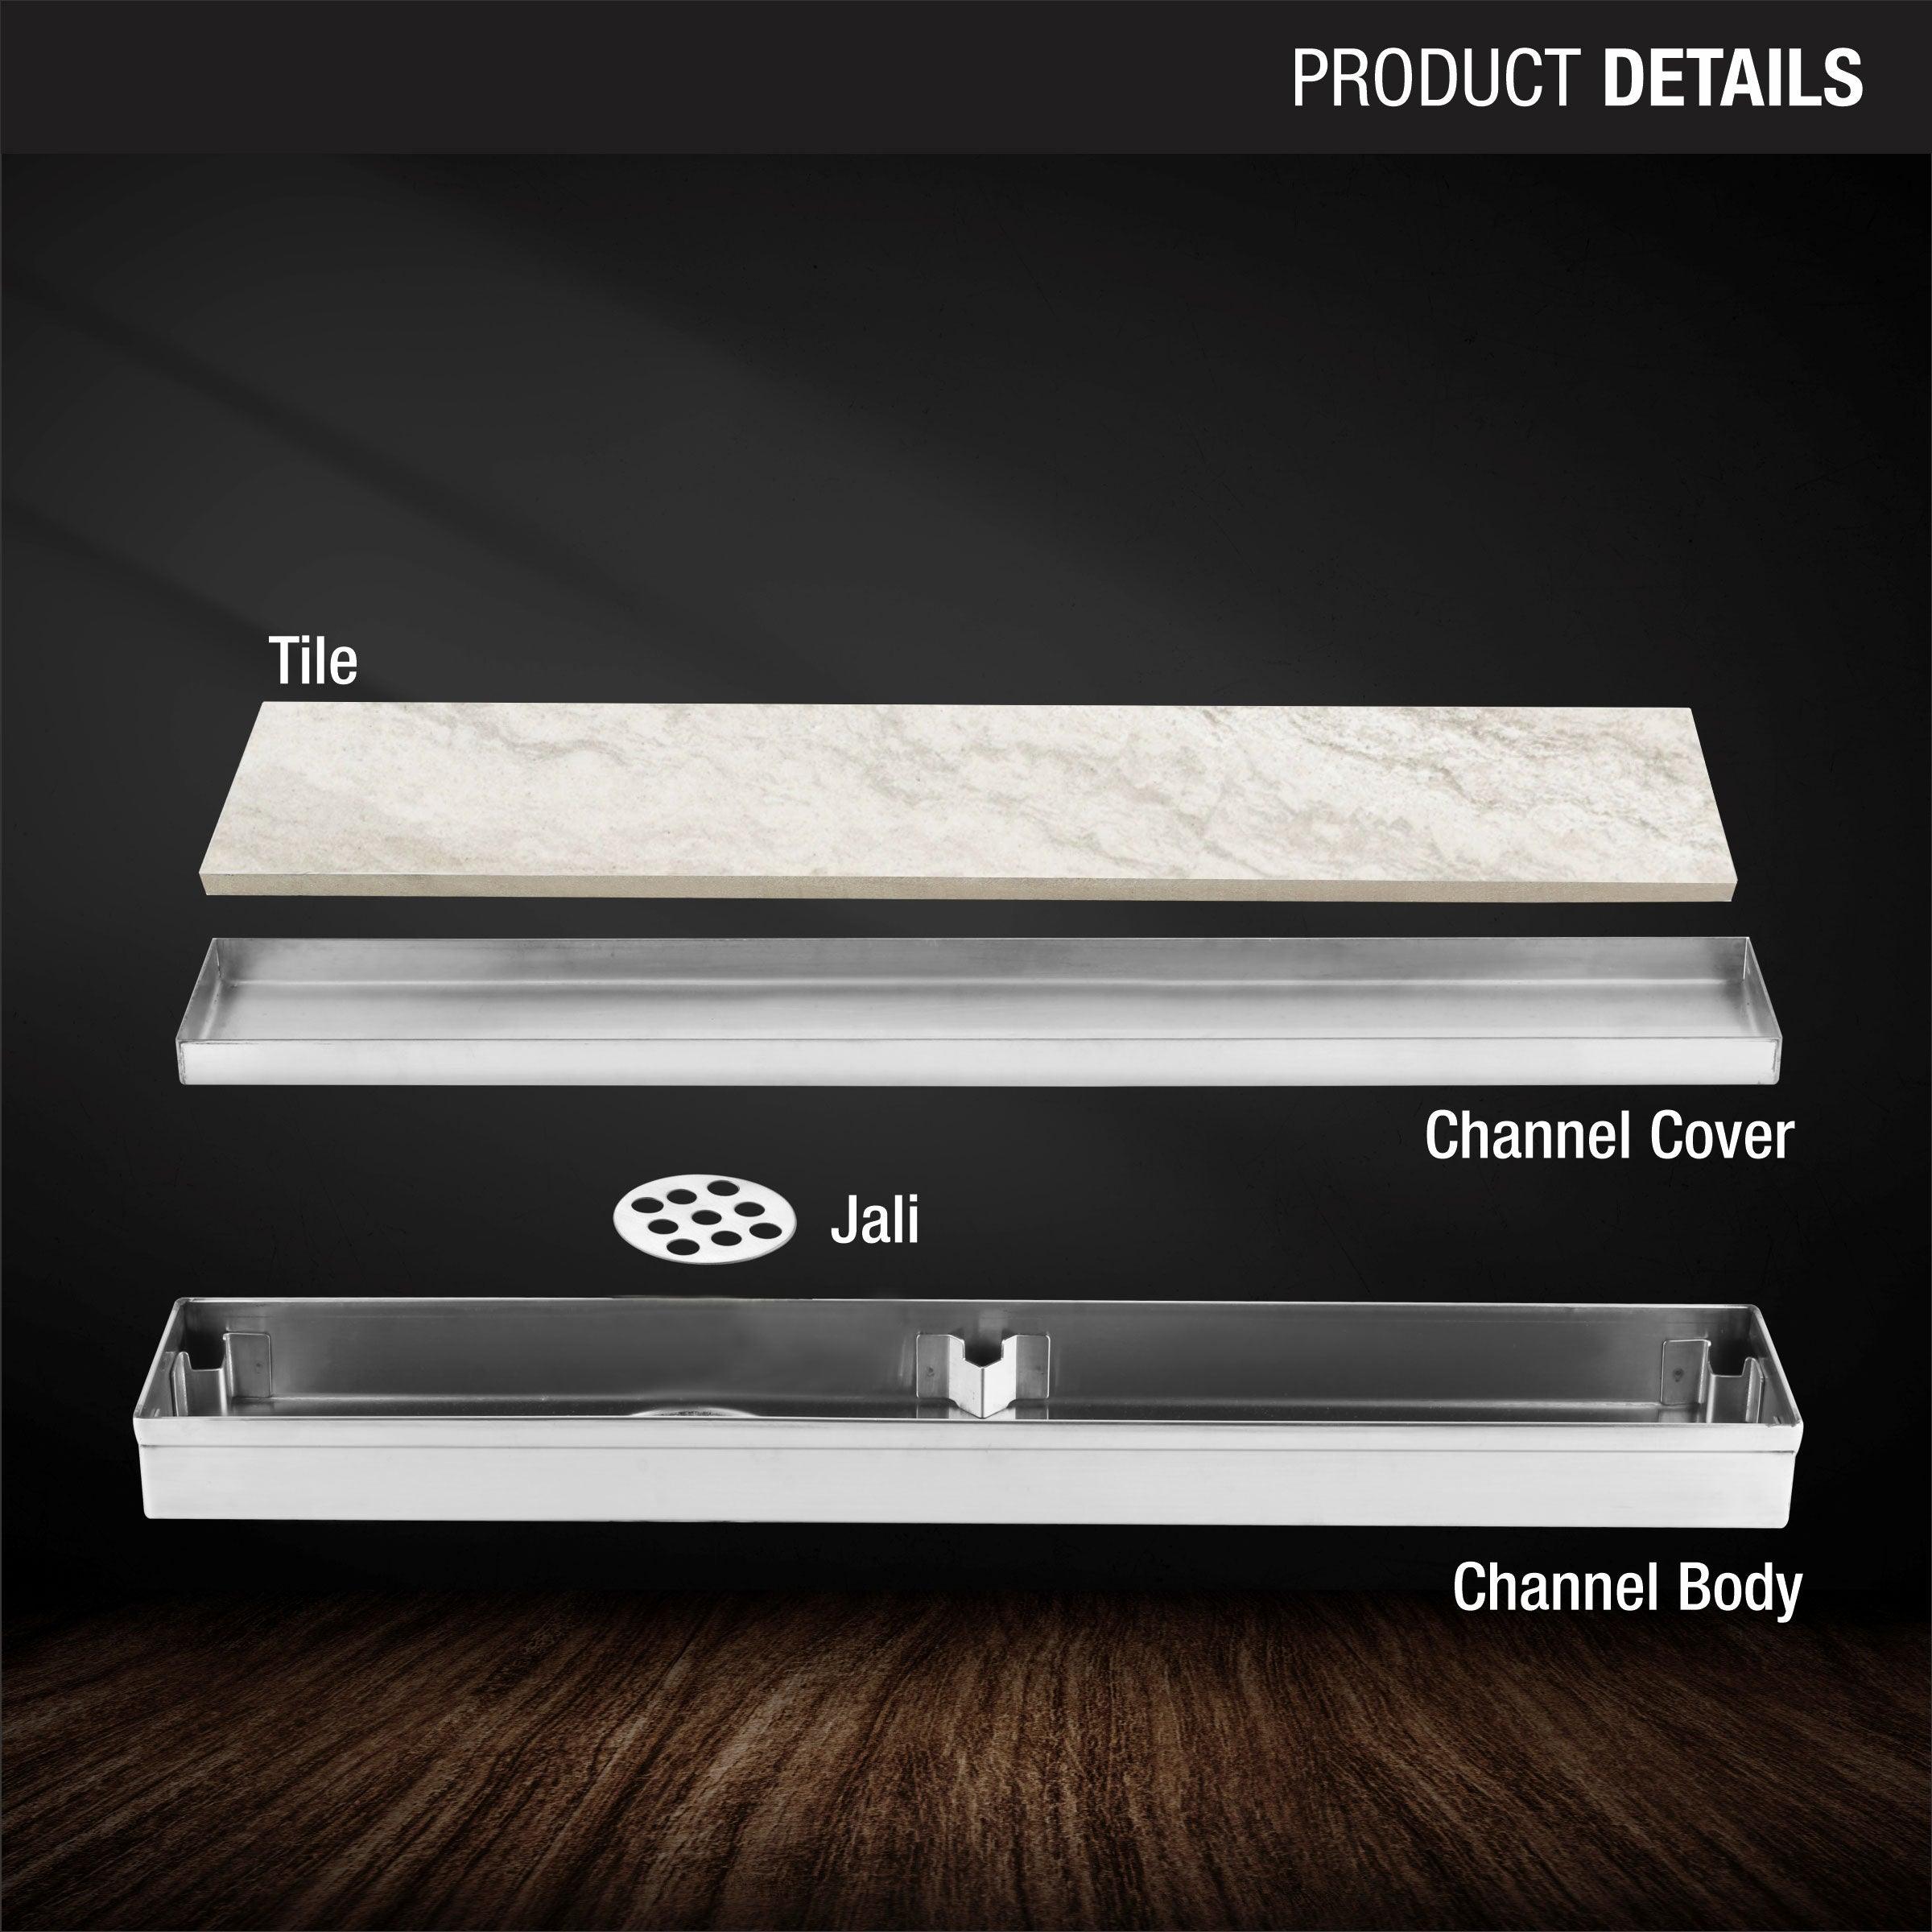 Tile Insert Shower Drain Channel (32 x 2 Inches) product details